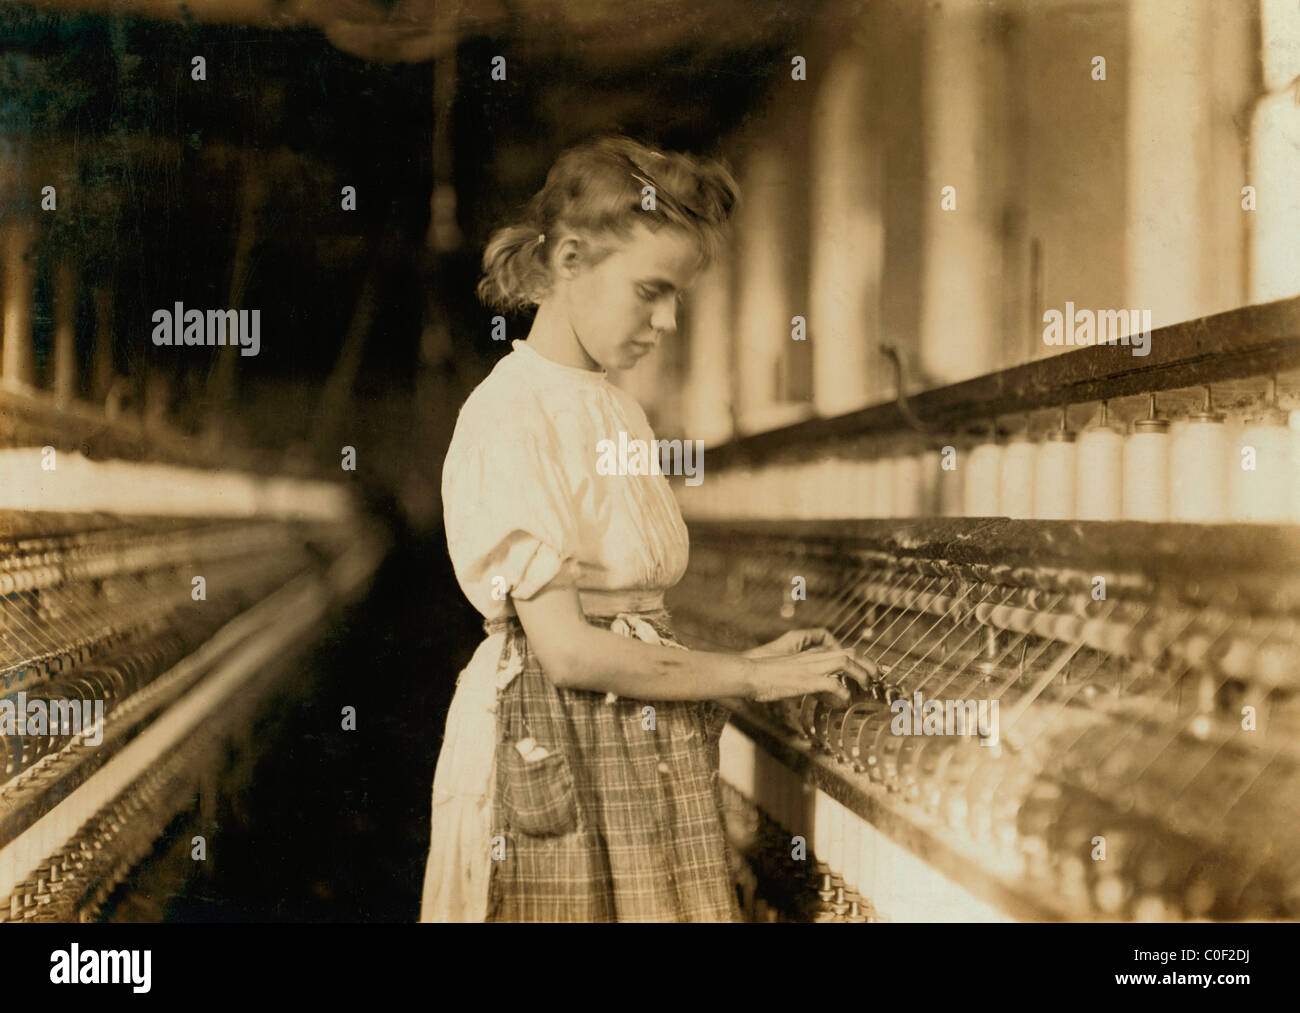 Girl working in Cherryville Mill, Cherryville, North Carolina early 1900's Stock Photo